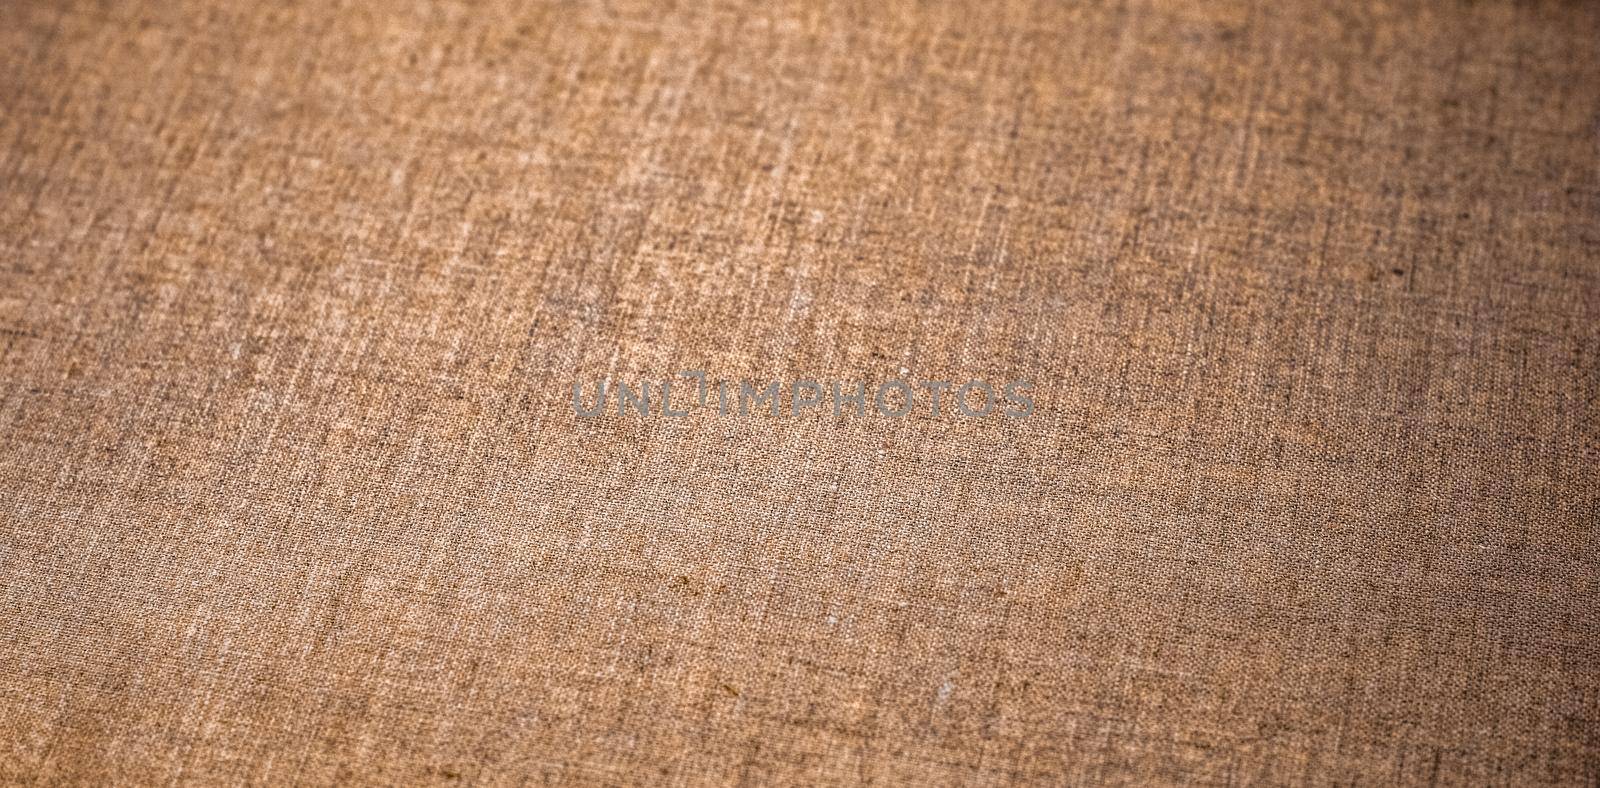 Decorative brown linen fabric textured background for interior, furniture design and art canvas backdrop by Anneleven